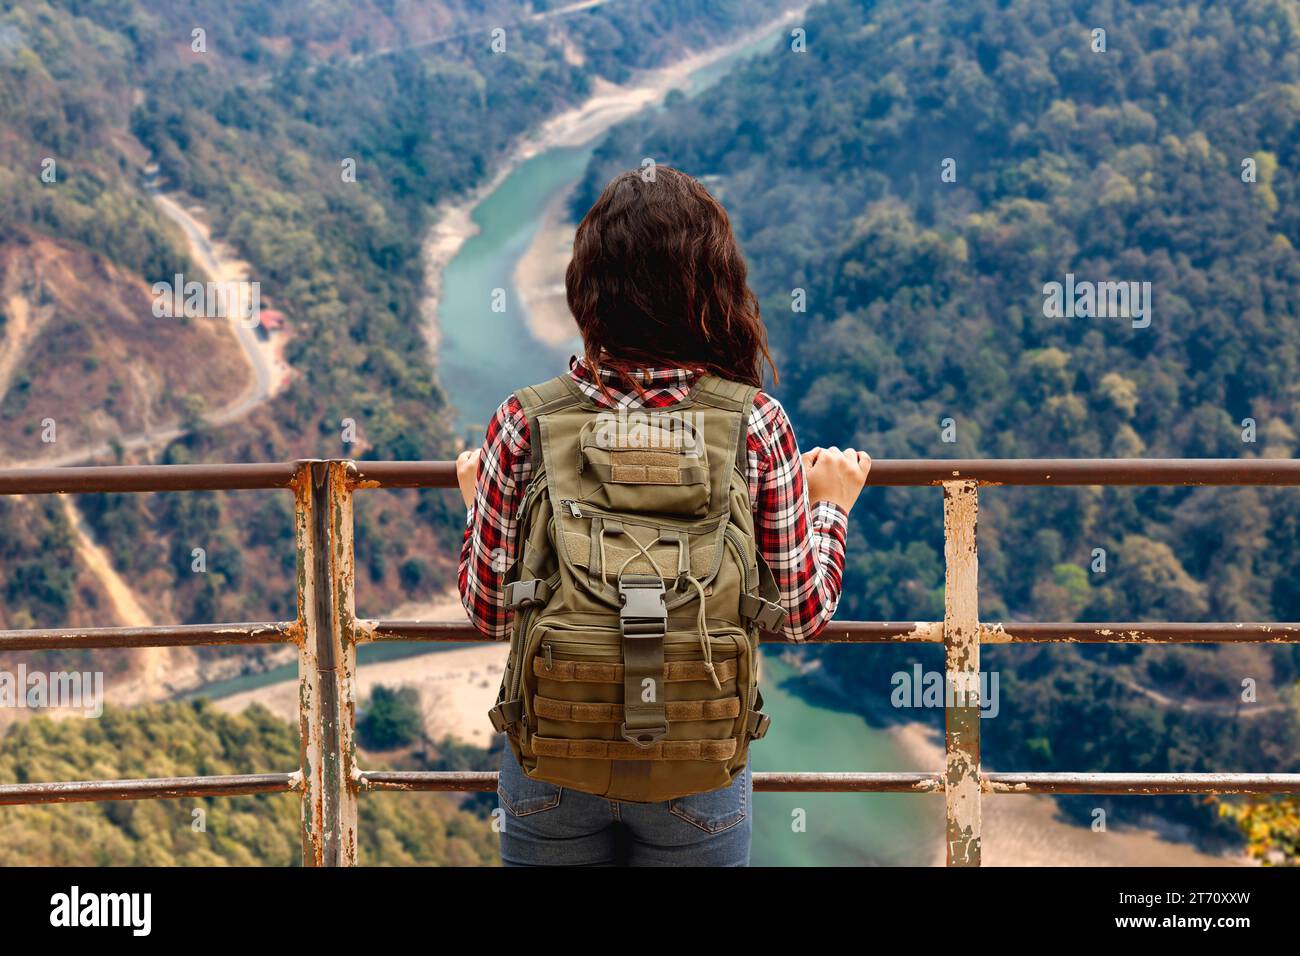 Girl tourist enjoy an aerial view of the Teesta river valley from Lover's point at Darjeeling, India Stock Photo